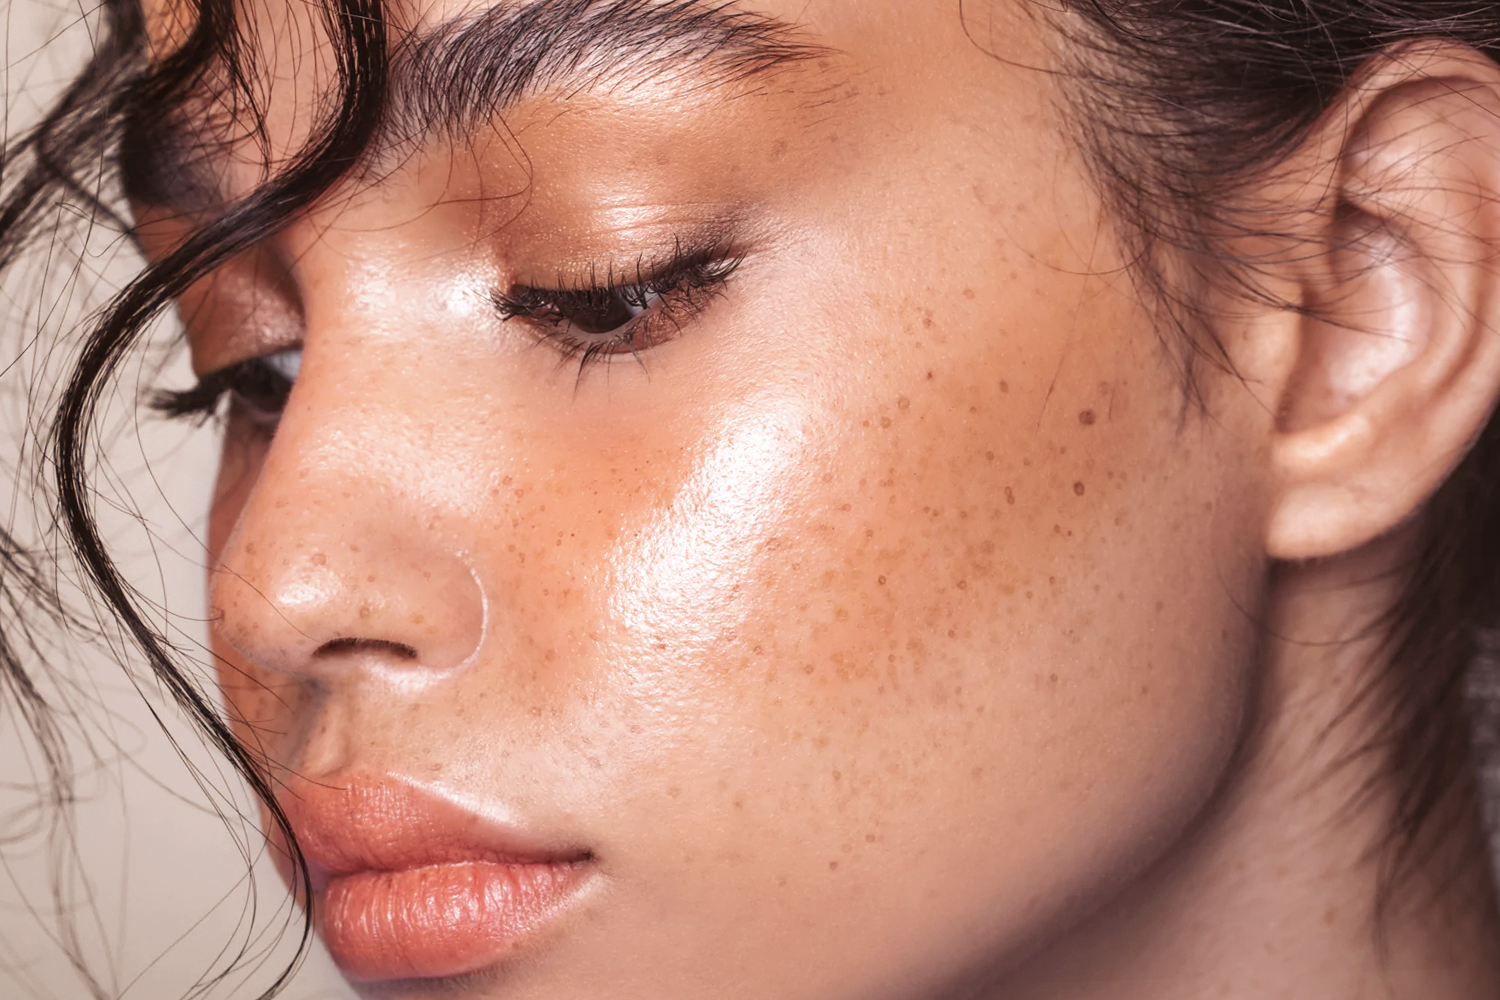 close-up beauty shot of a woman with dewy, clean girl makeup look and freckles on her face